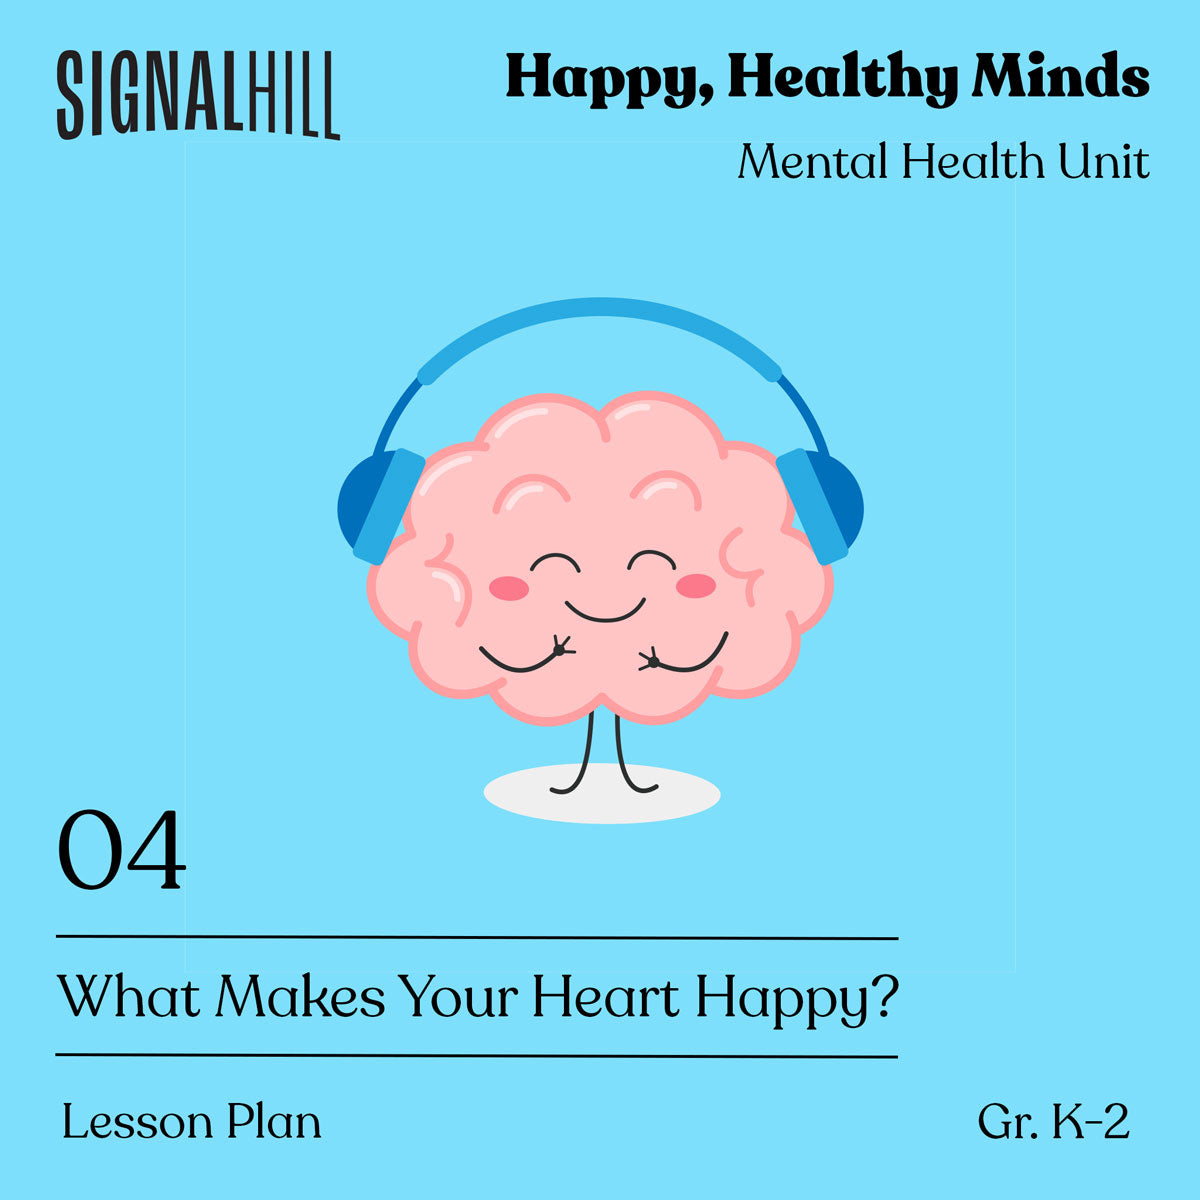 Lesson Plan 4: What Makes Your Heart Happy?